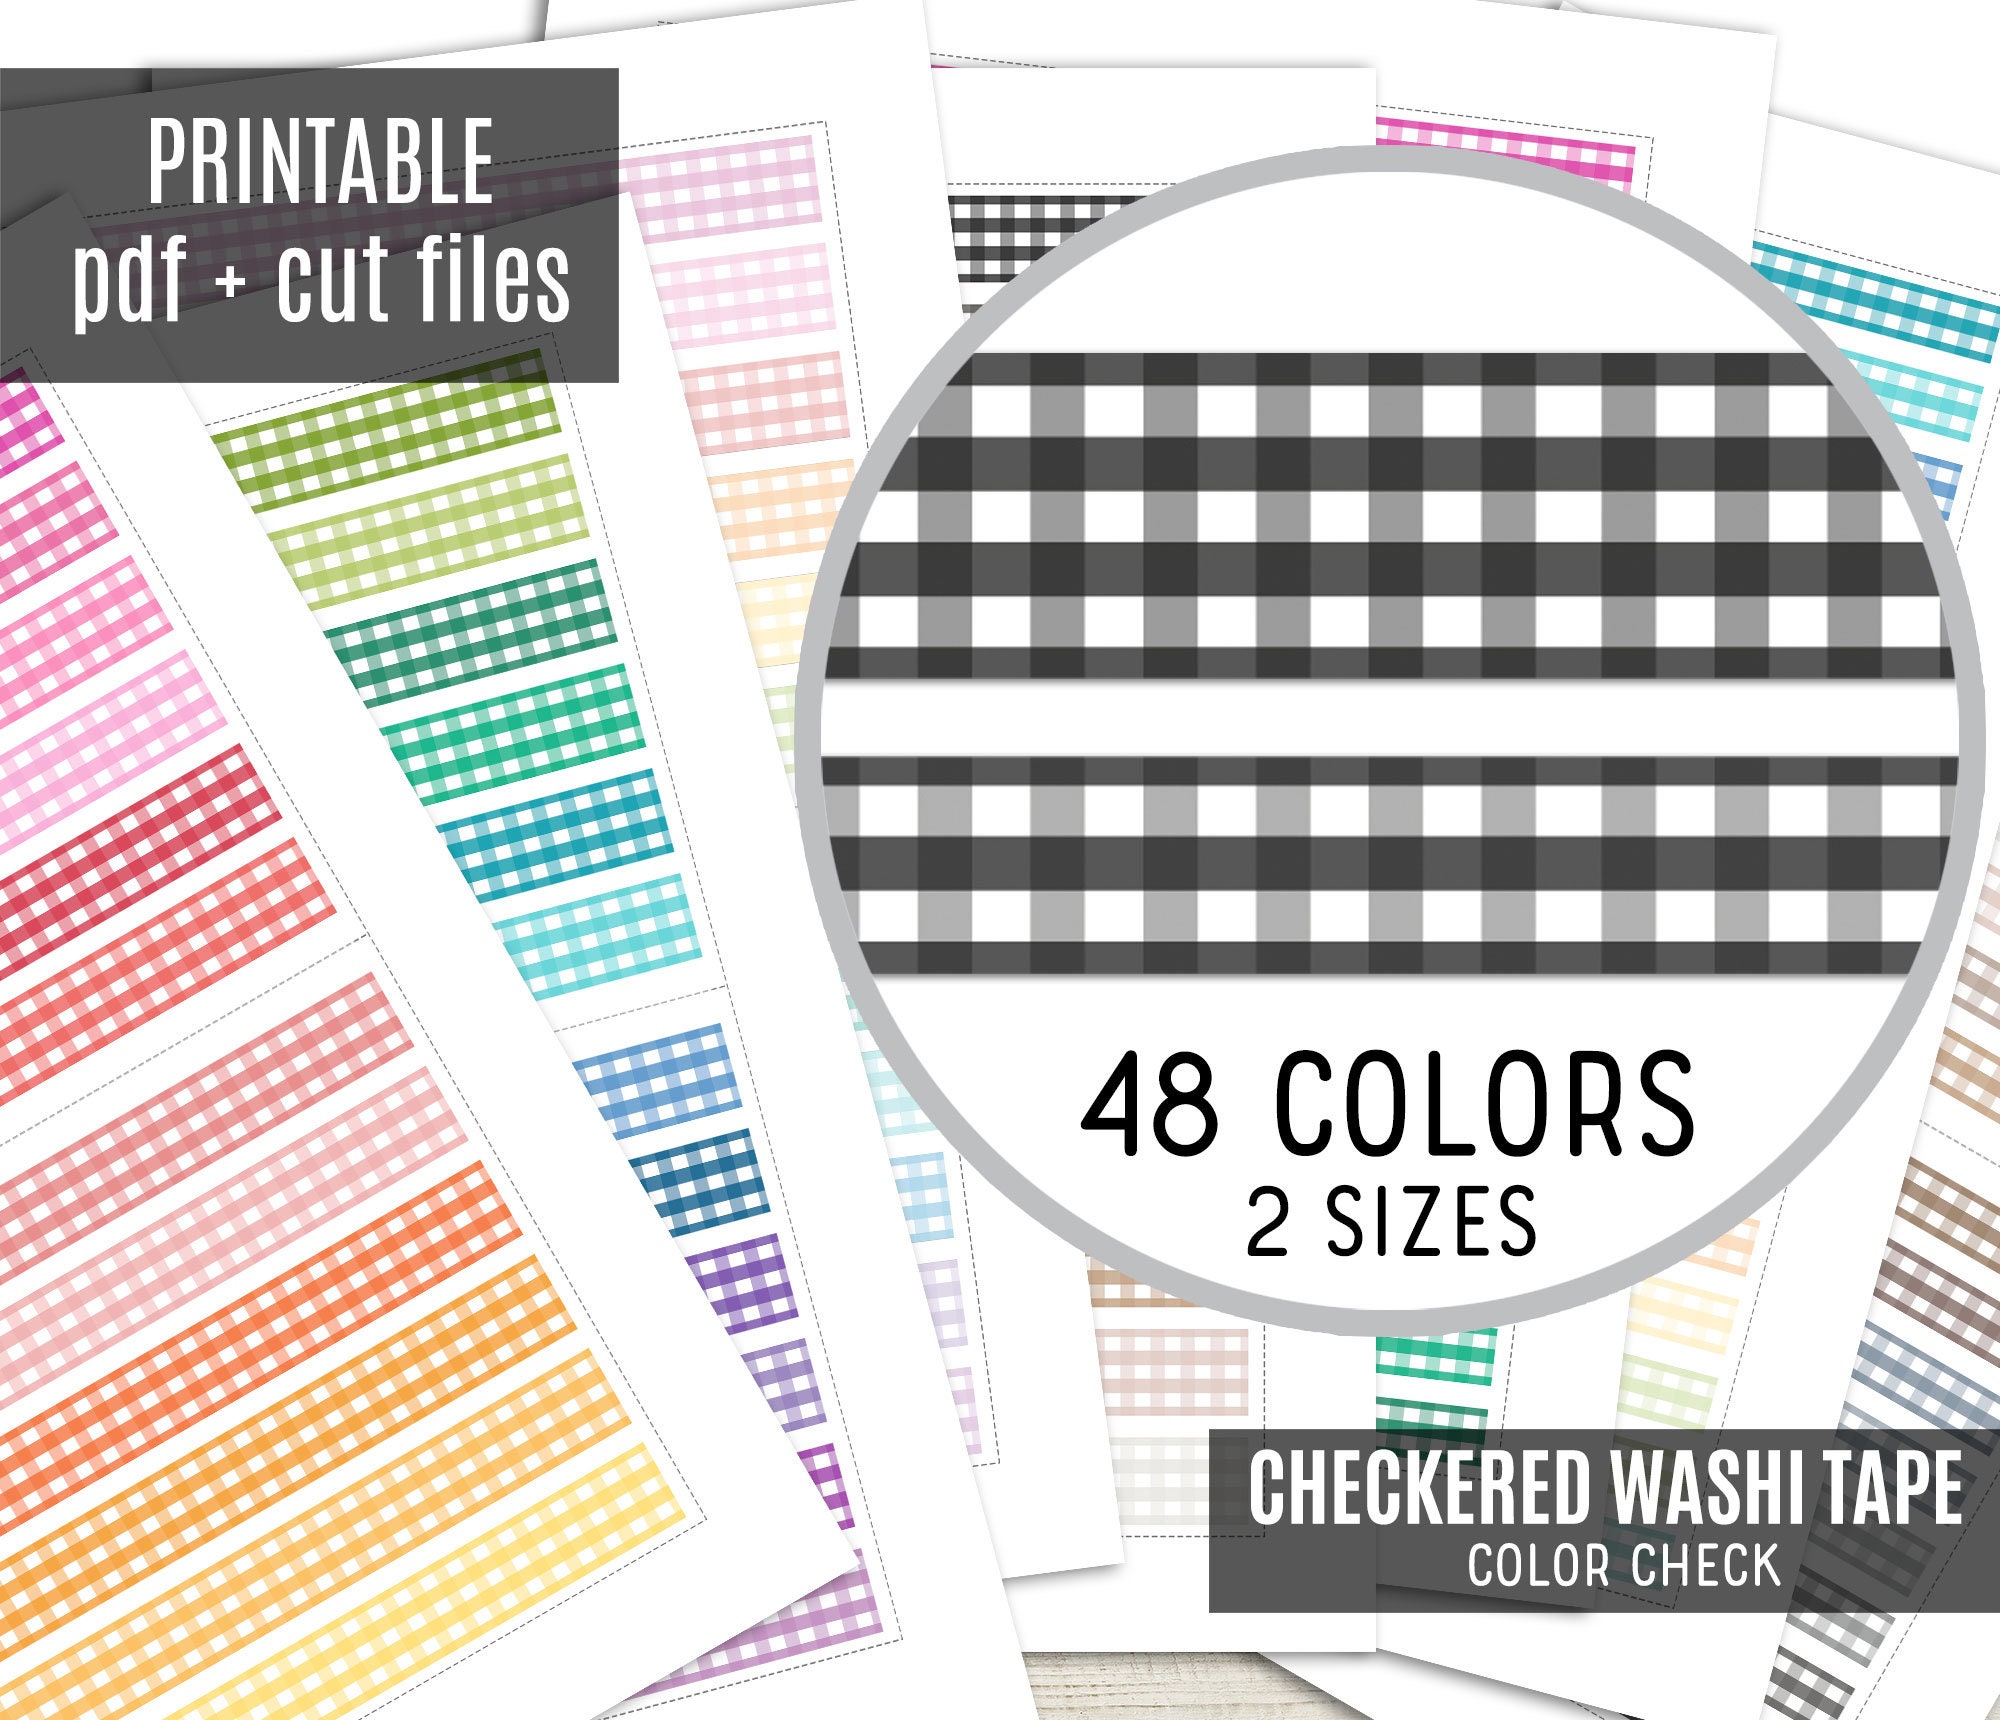 Check It! Out of The Blue Washi Tape